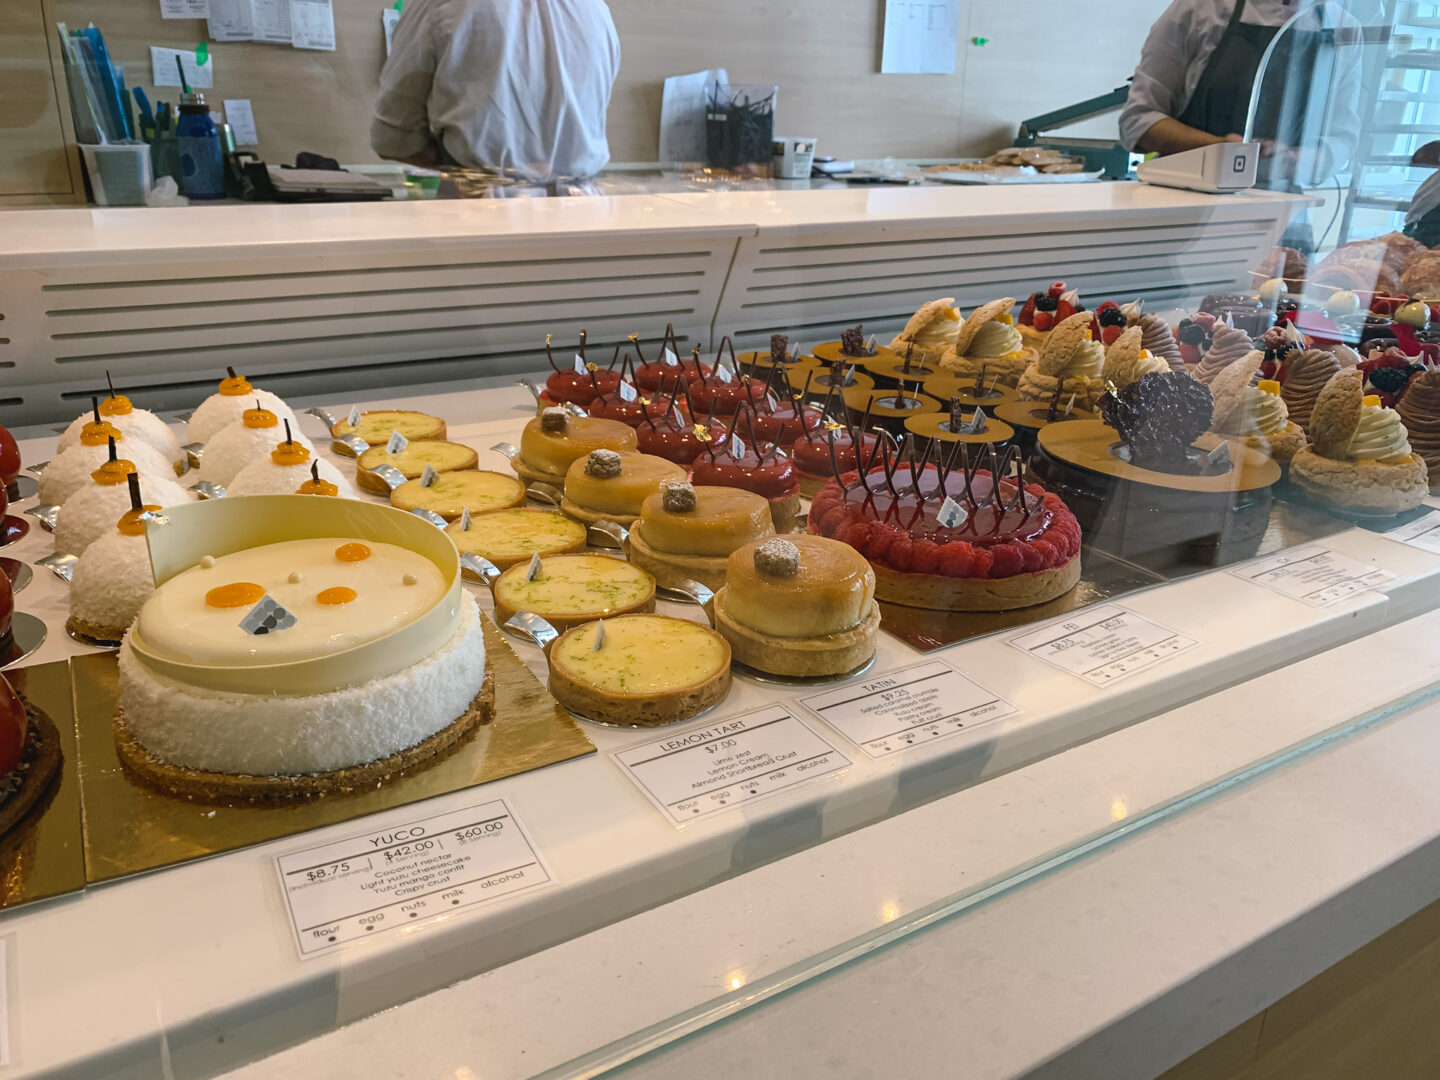 Cakes from Duo Pâtisserie & Café in Markham, Ontario